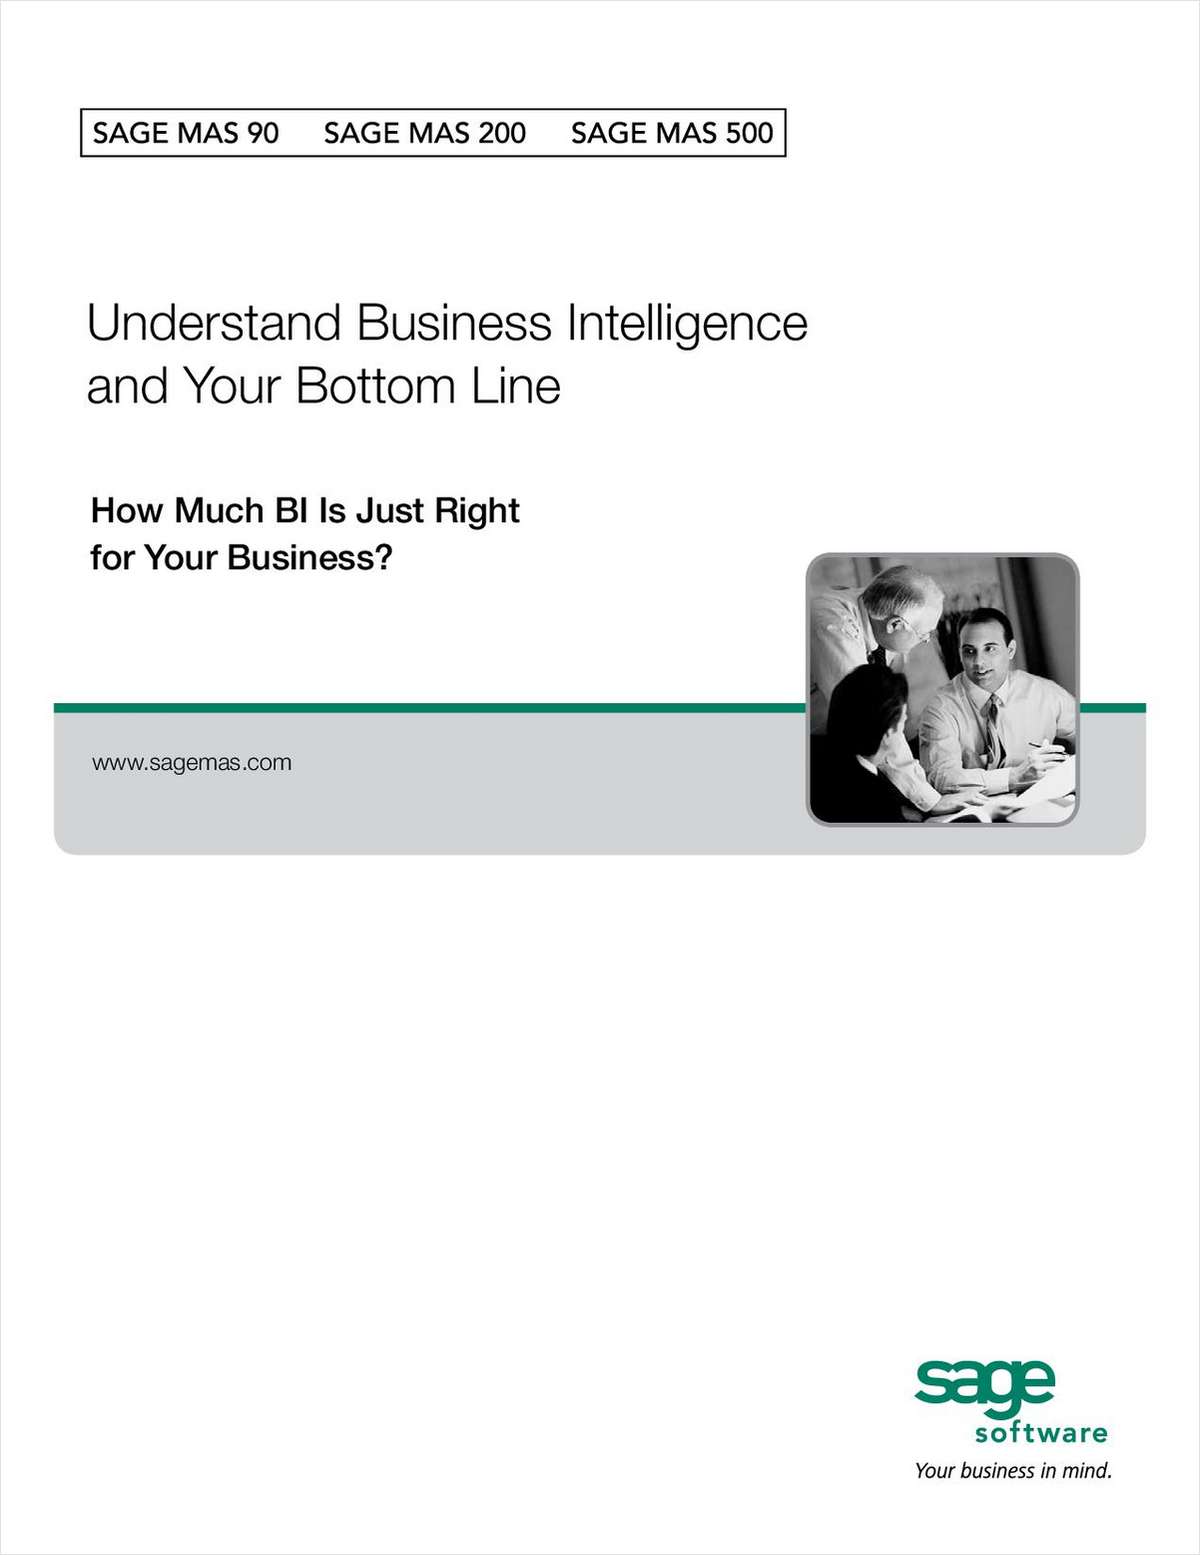 Understanding Business Intelligence and Your Bottom Line